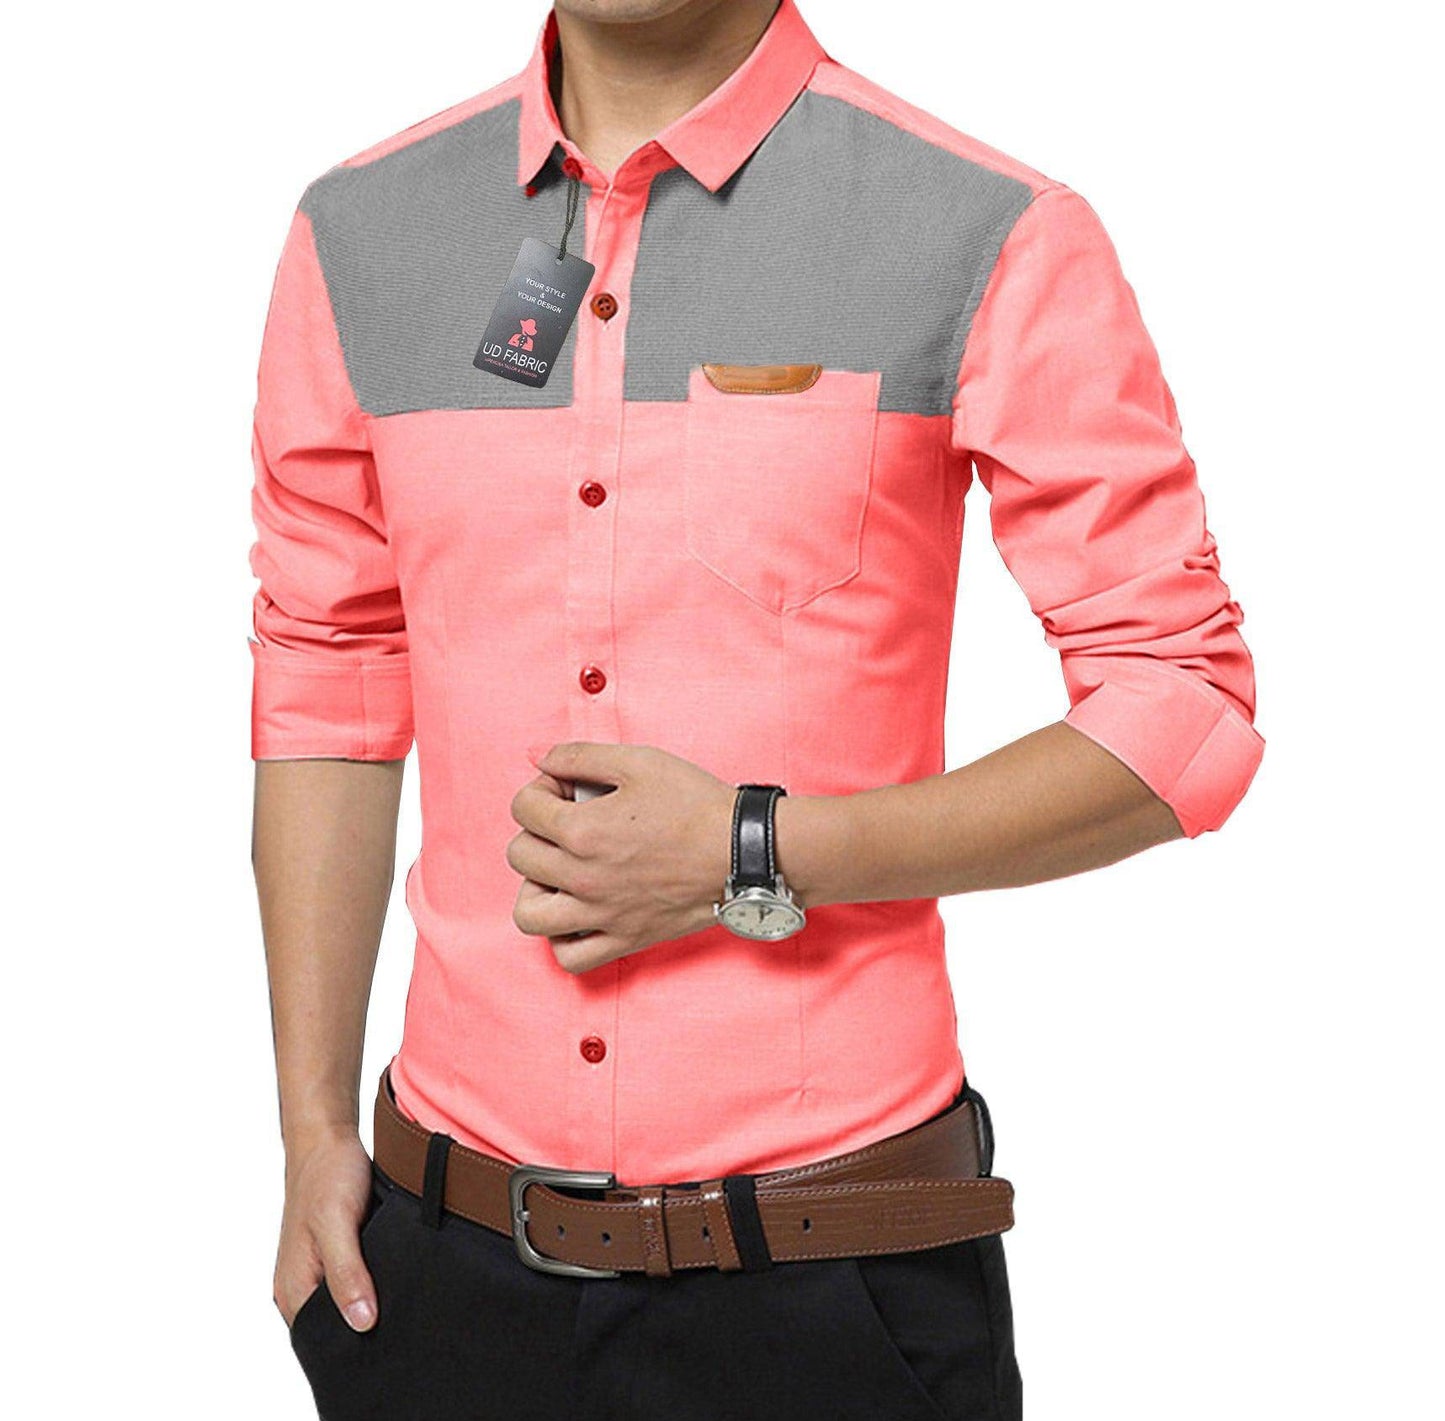 UD FABRIC Casual Slim Cotton Shirt for Men - Maroon - UD FABRIC - Your Style our Design